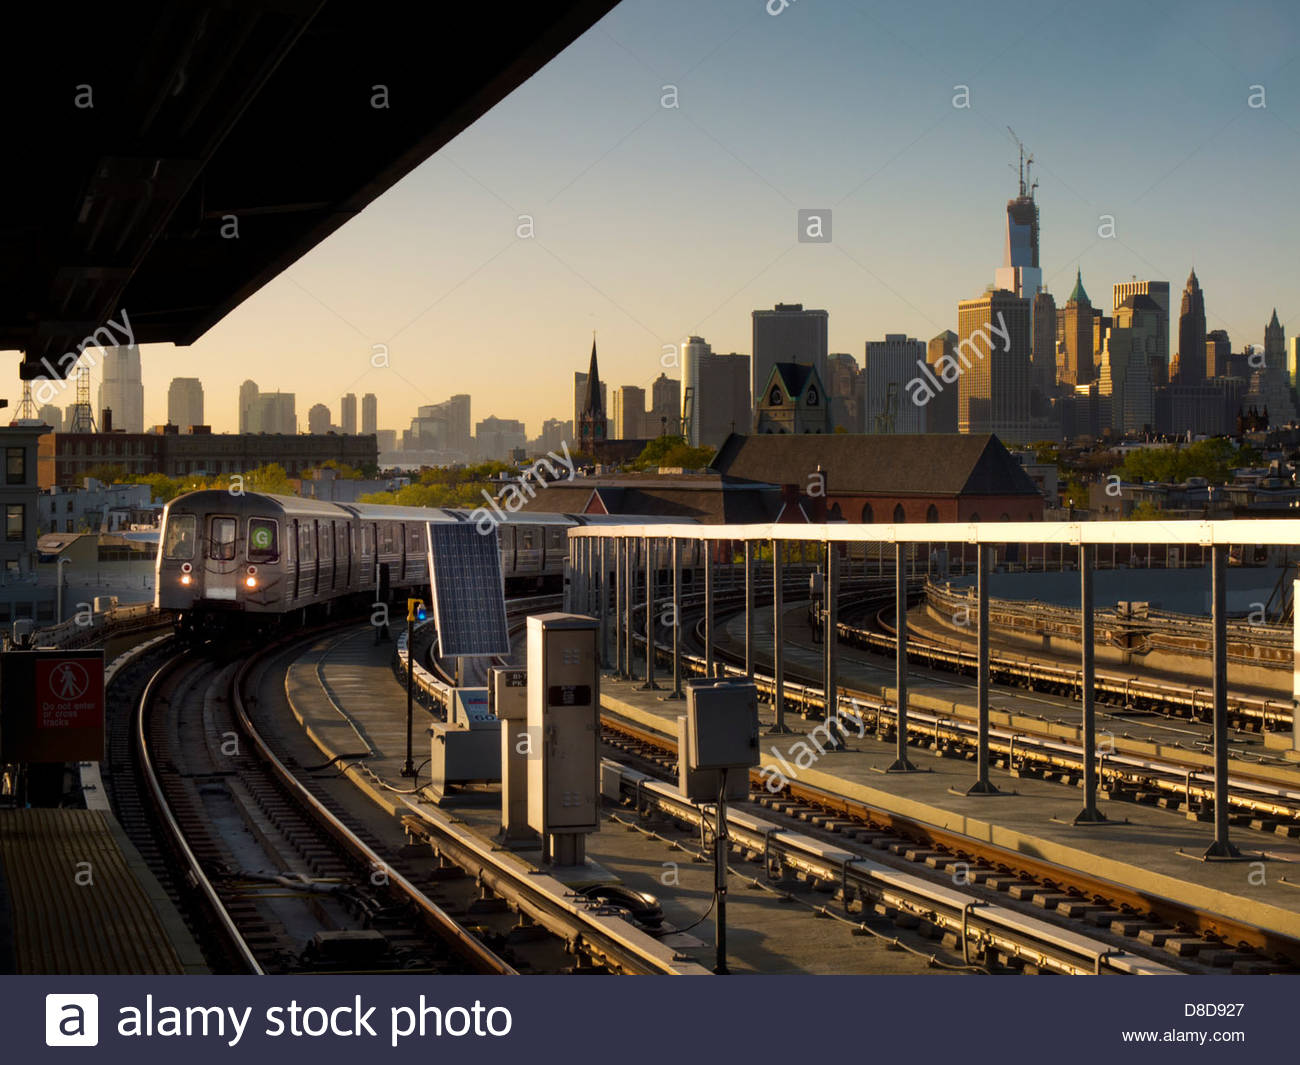 Subway Train With New York City In Background Stock Photo